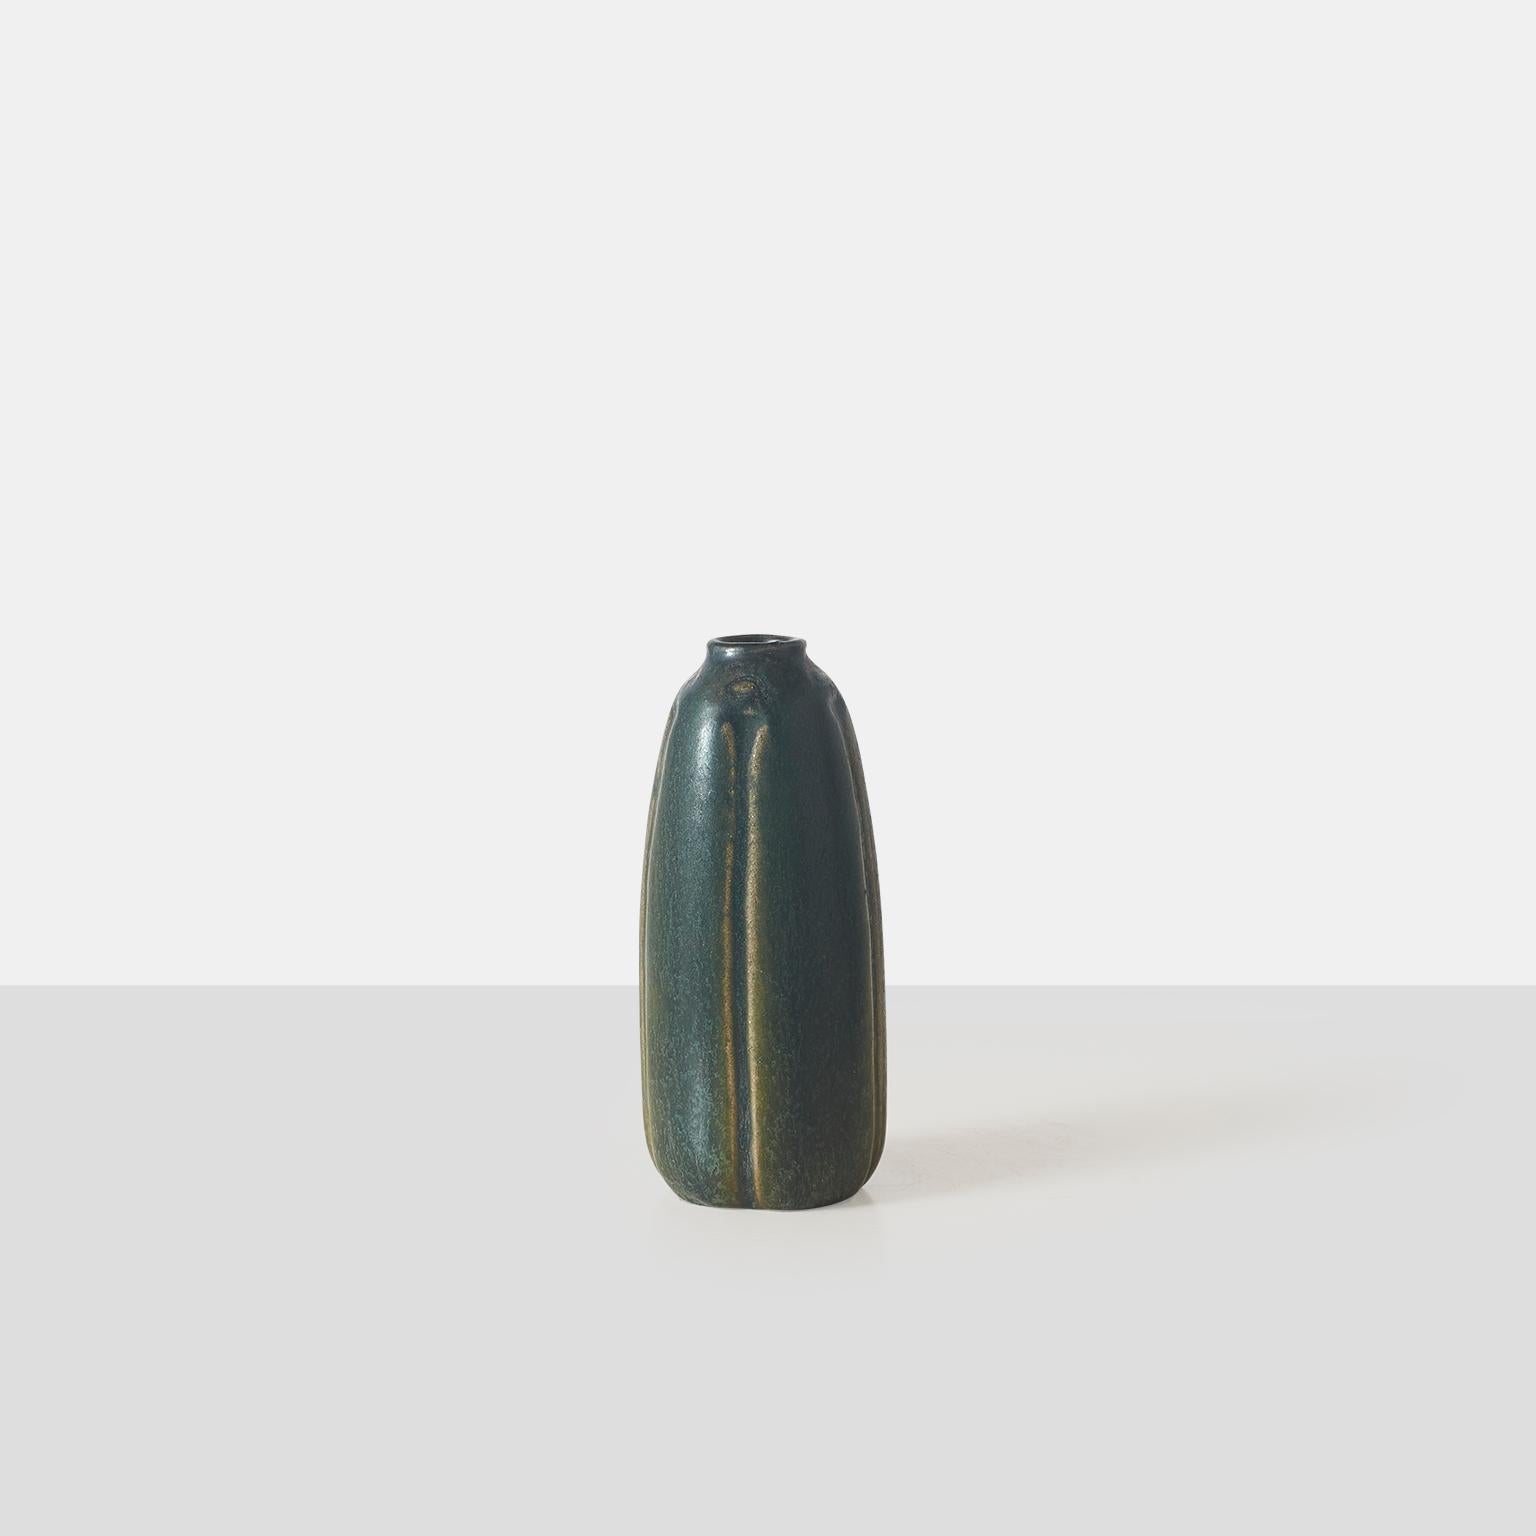 A tapering fluted stoneware bud vase in green, blue and earth tones. Makers mark and date stamped on base.